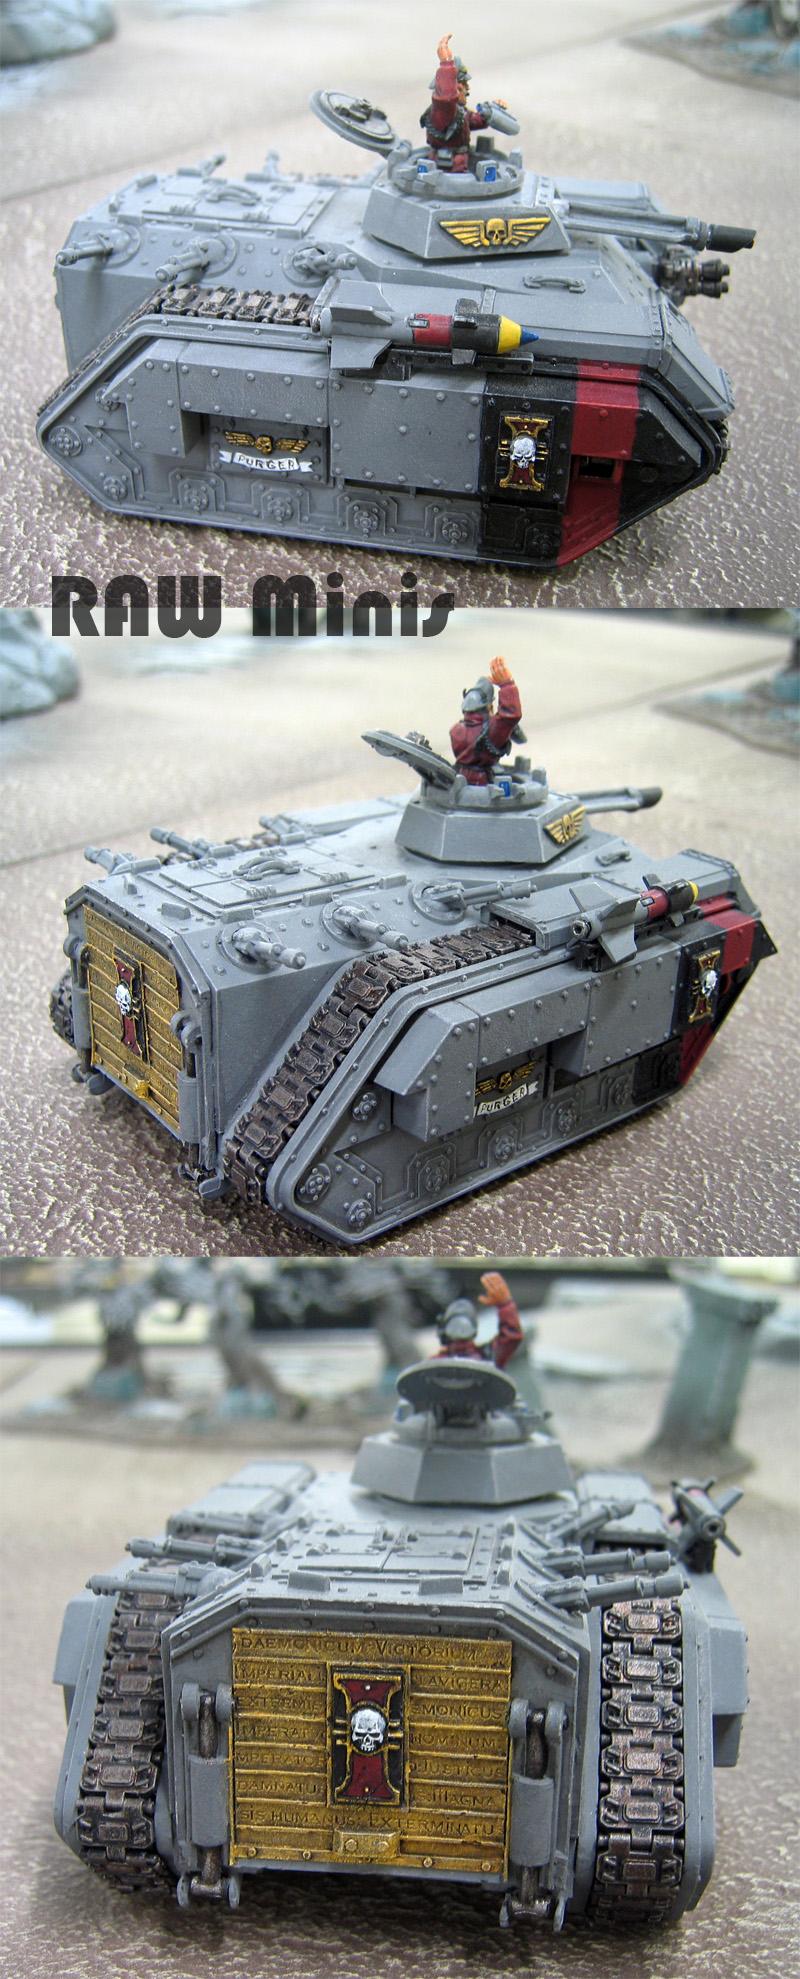 Armor, Chimera, Grey Knights, Inquisition, Painting, Vehicle, Warhammer 40,000